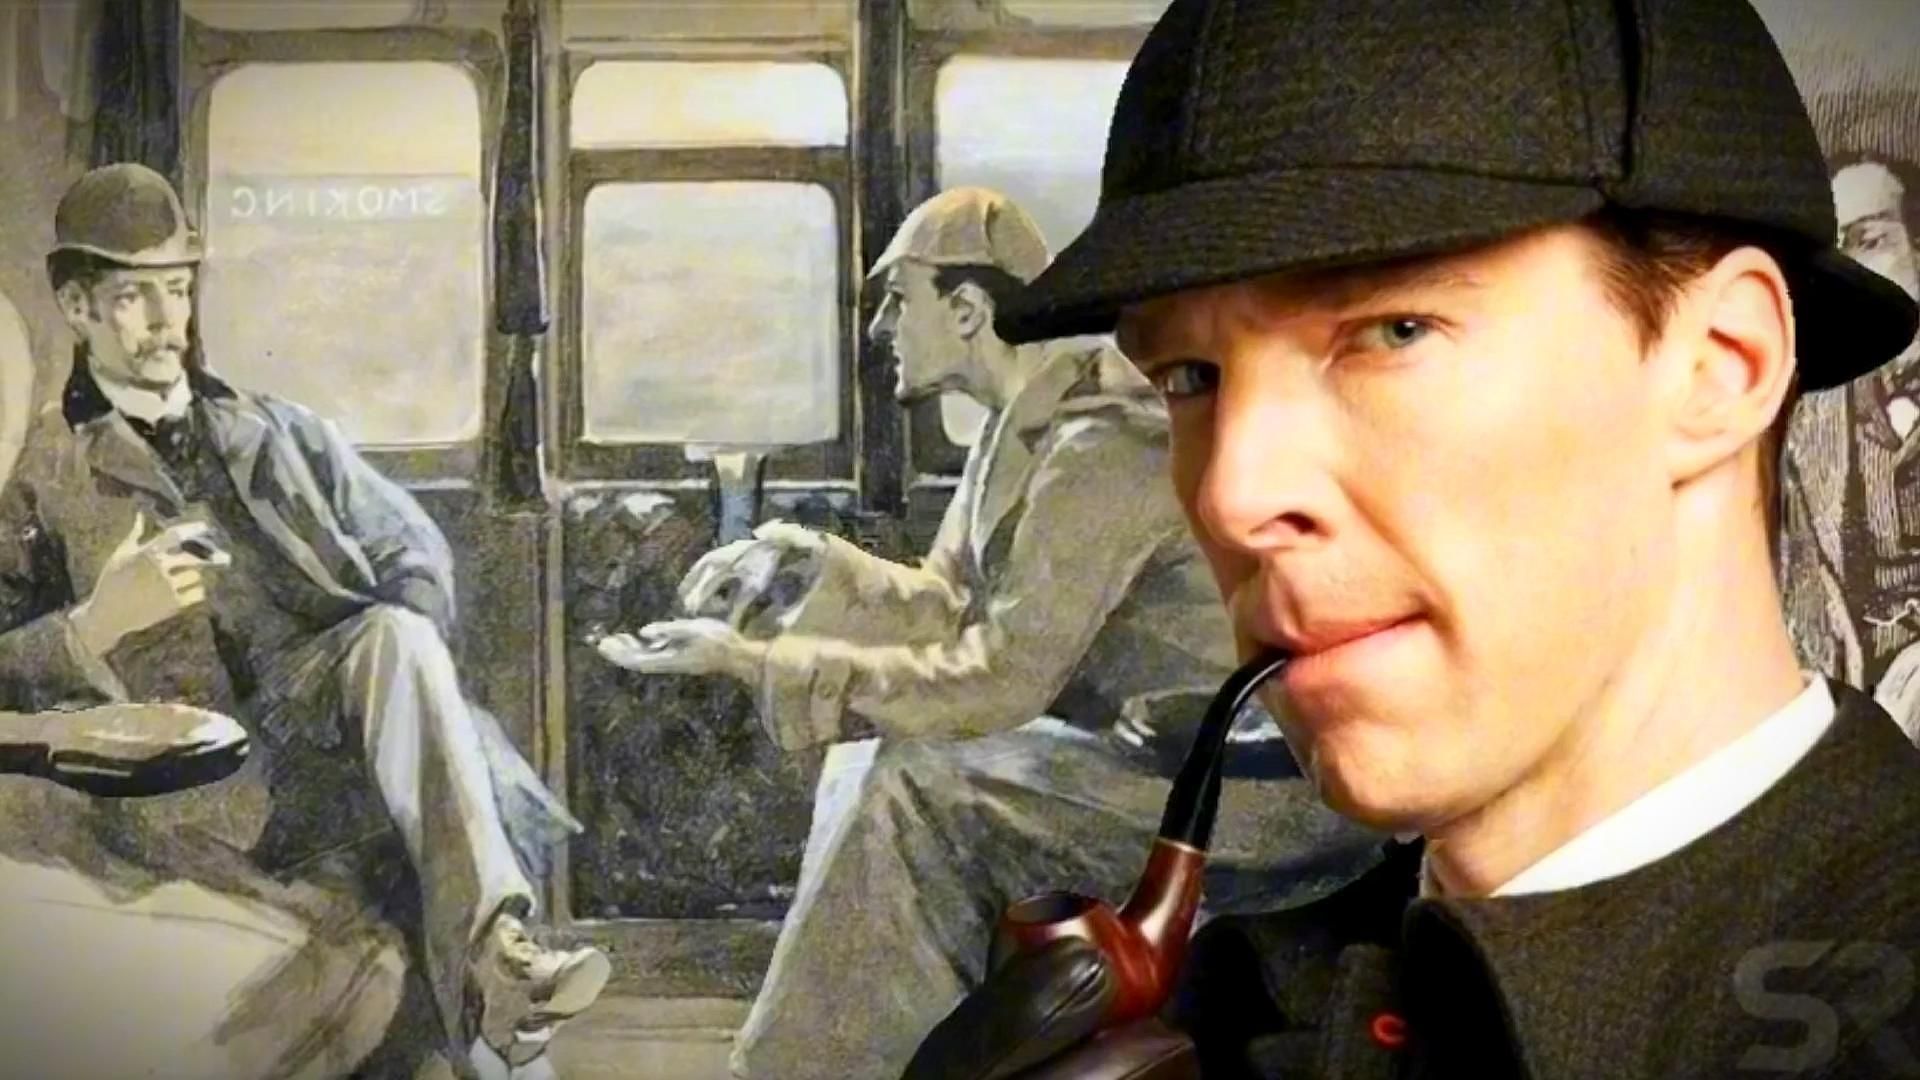 A collage of Benedict Cumberbatch as Sherlock Holms overtop a painted image of Sherlock Holmes and Dr. Watson